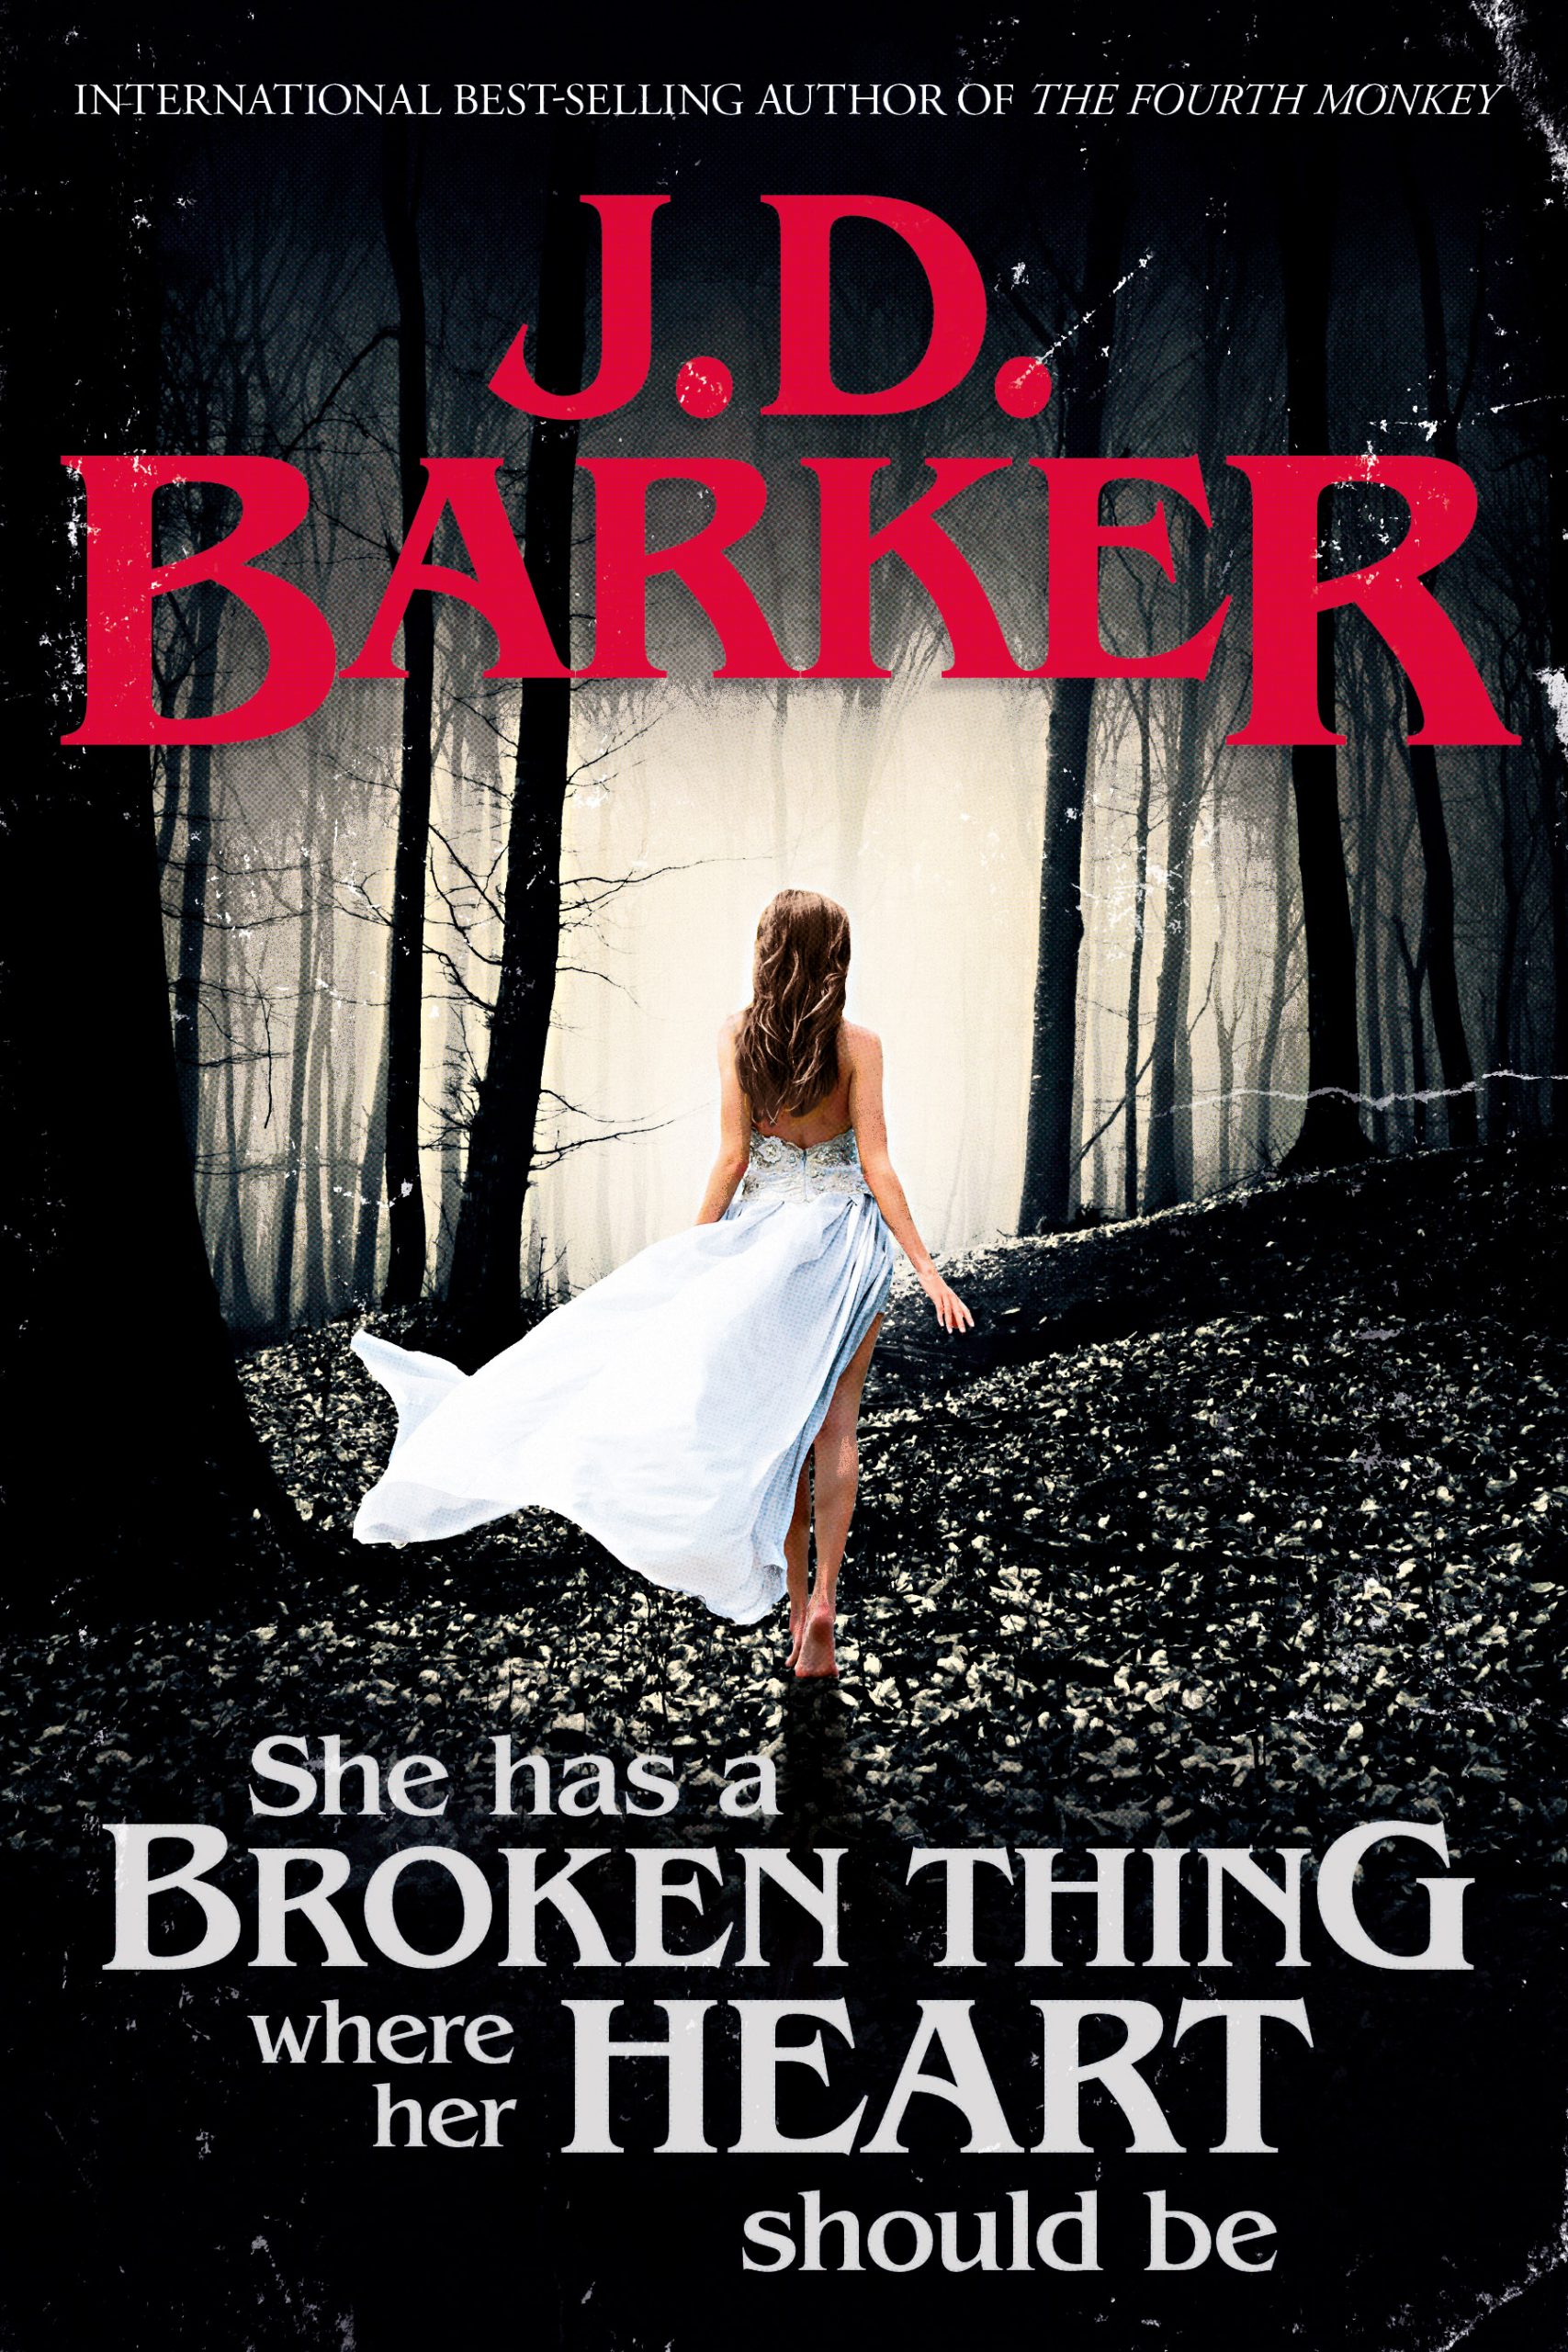 She Has A Broken Thing Where Her Heart Should Be - Novel Release Date? 2020 Horror & Mystery Thriller Releases